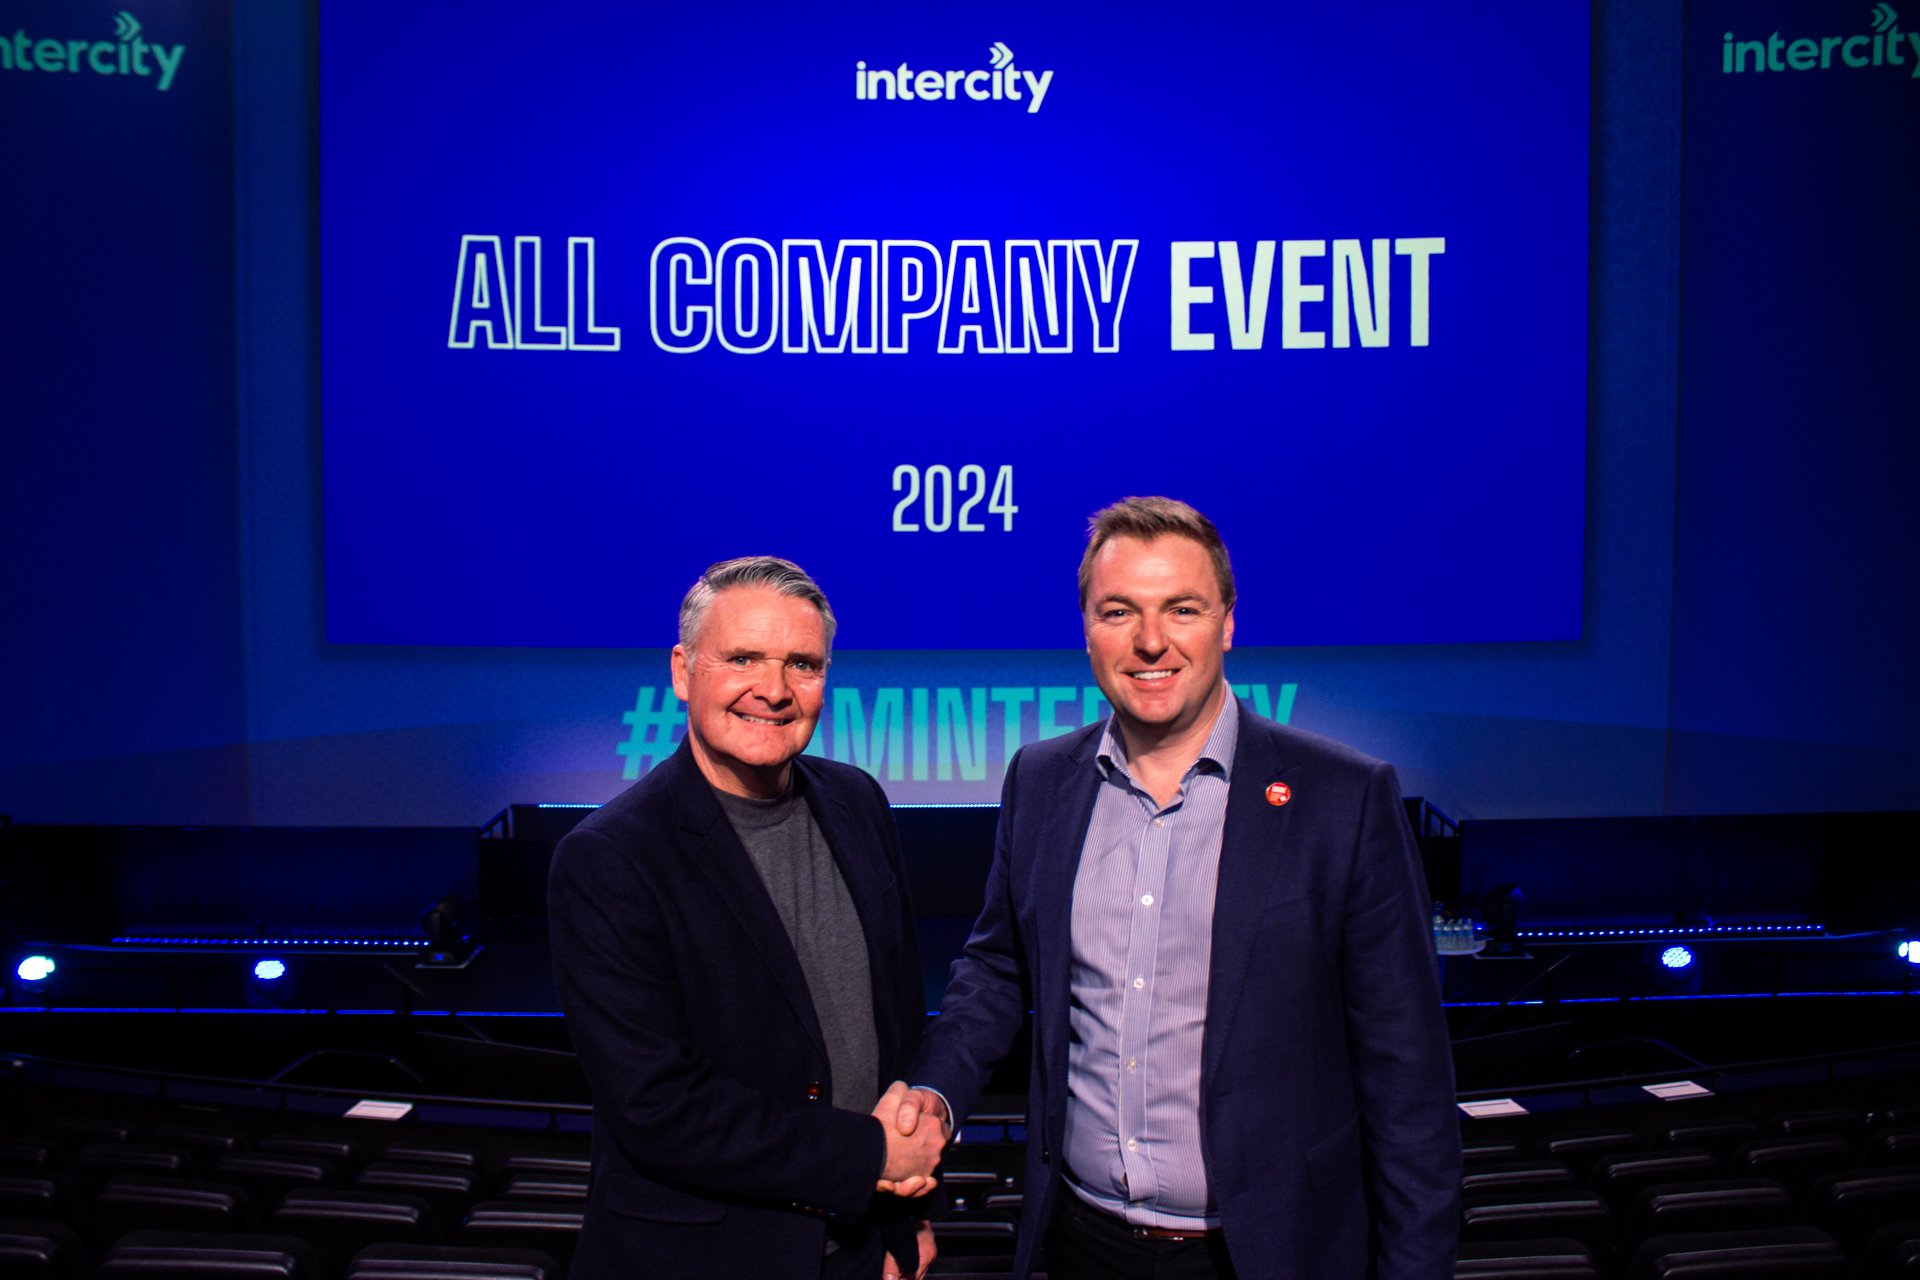 Left - Charlie Blakemore, Intercity CEO. Right - Andrew Jackson, Intercity Group CEO